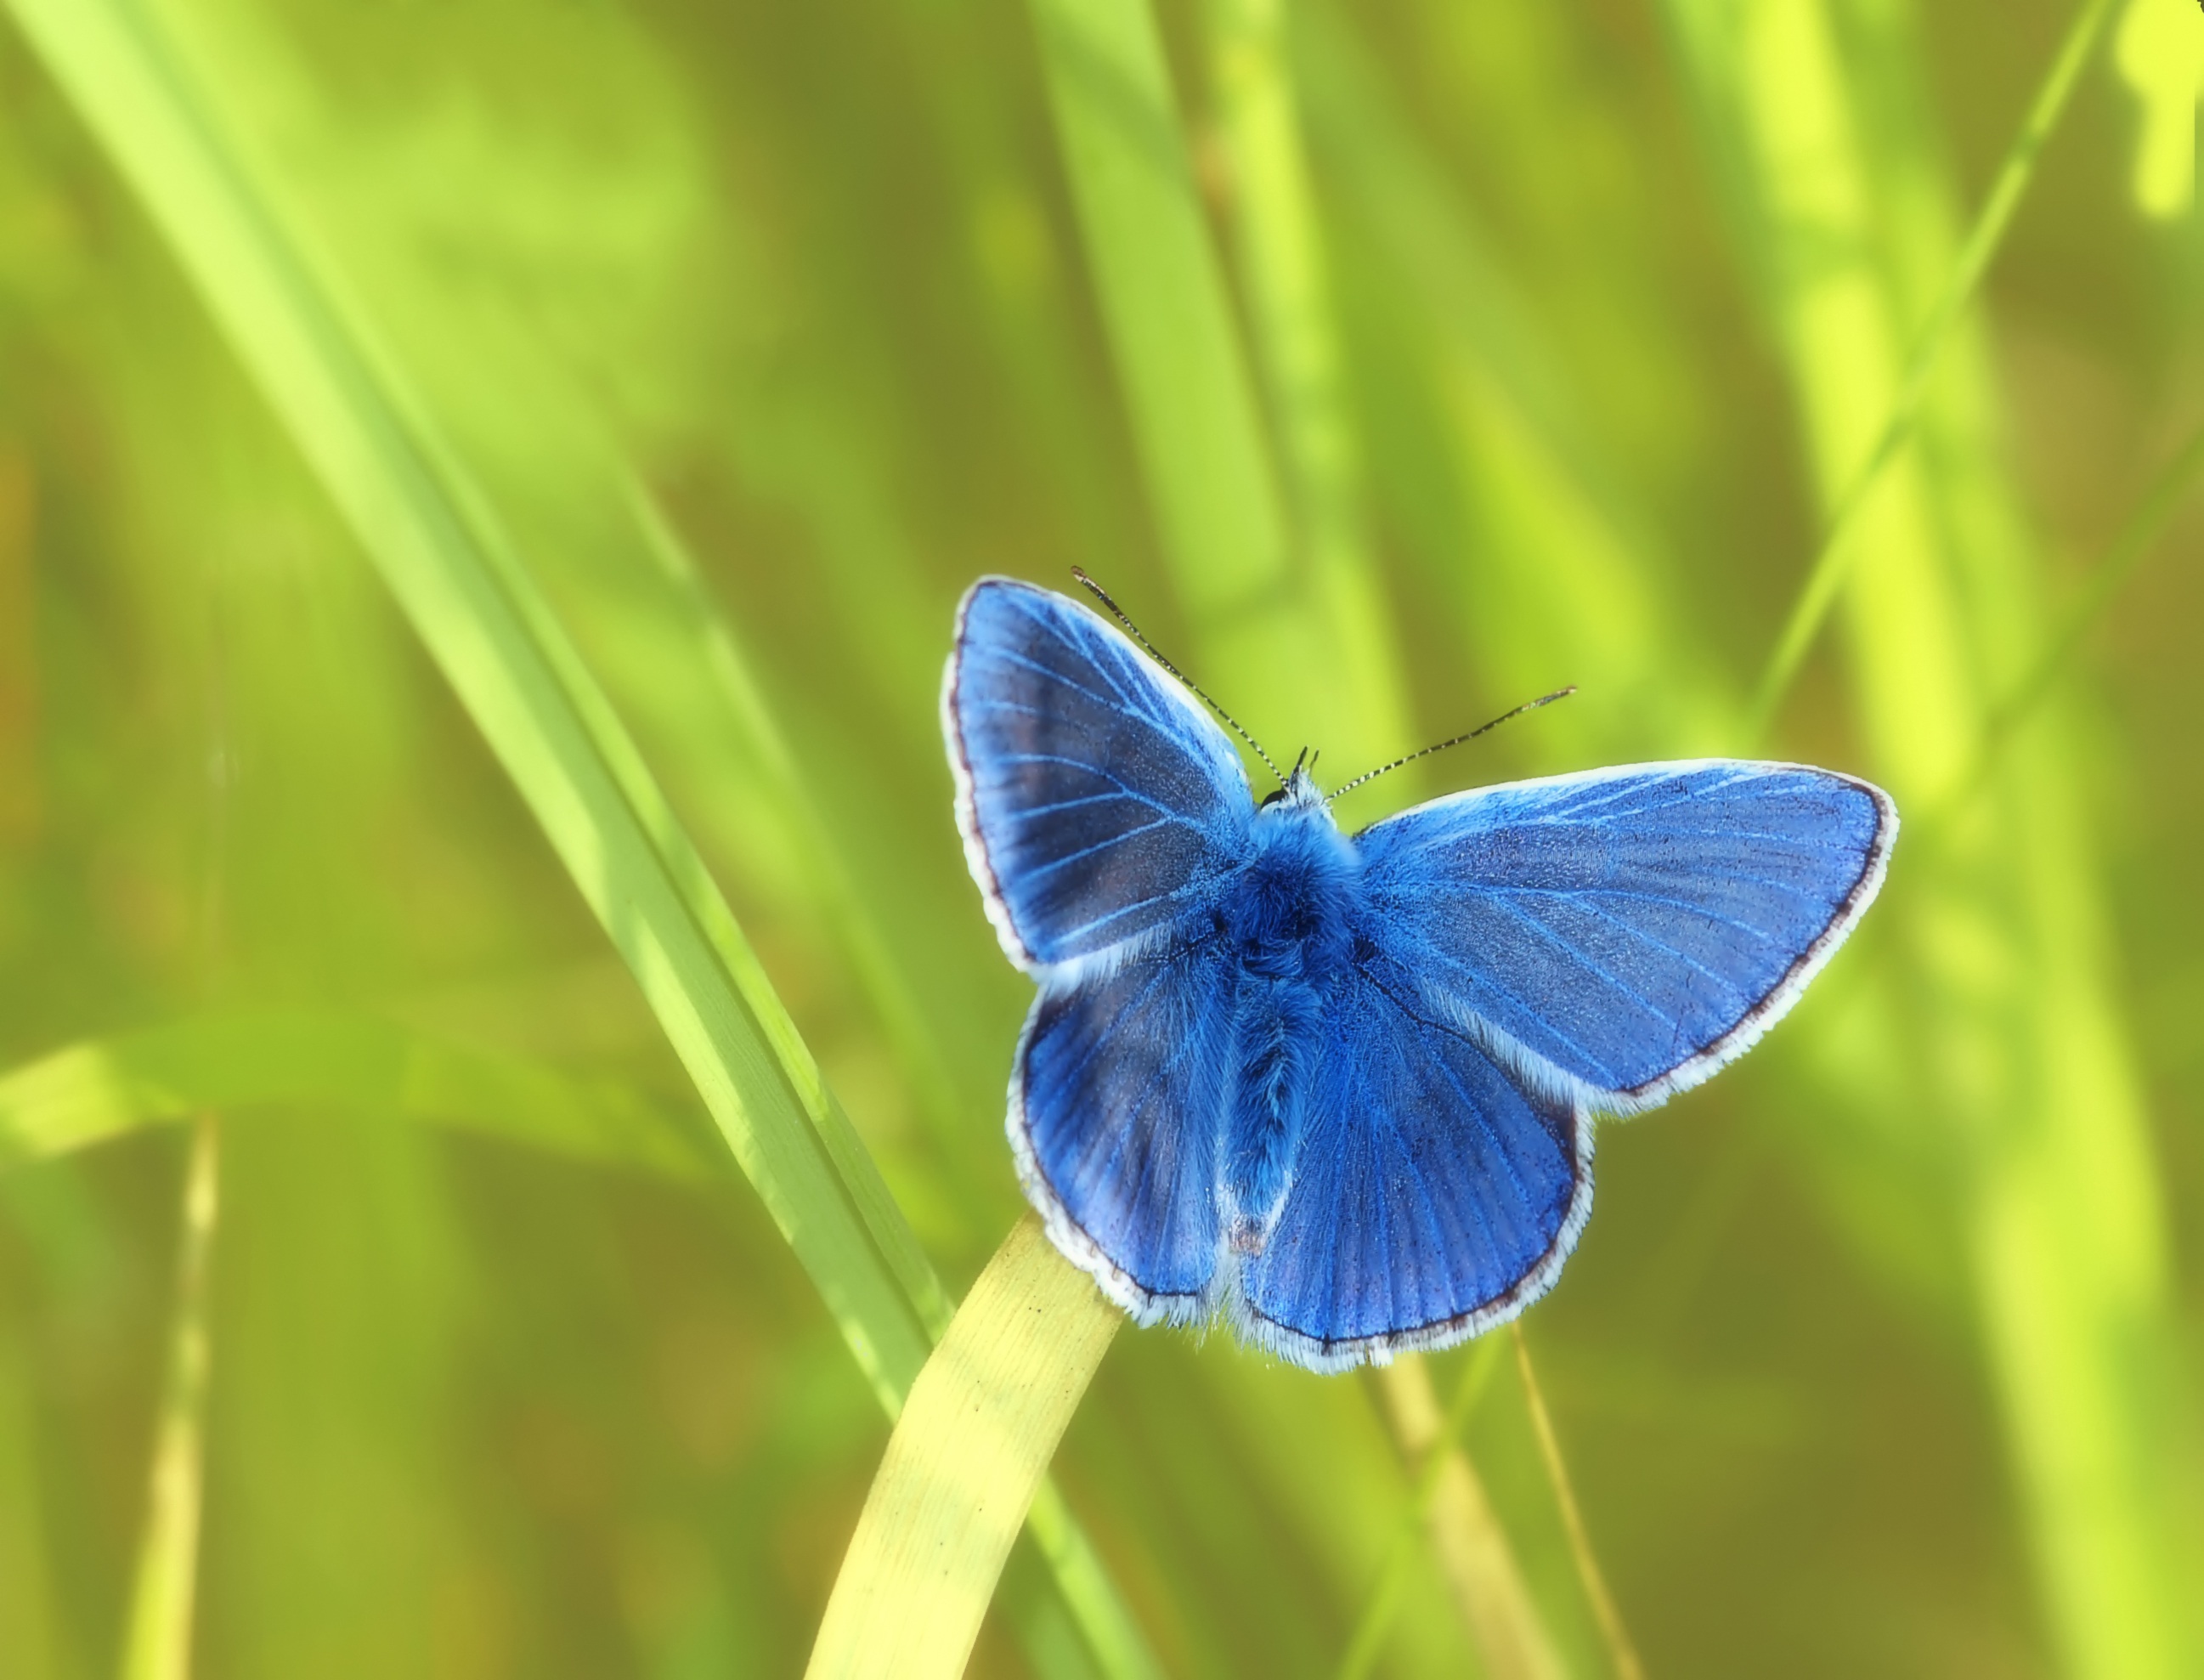 Blue butterfly photo